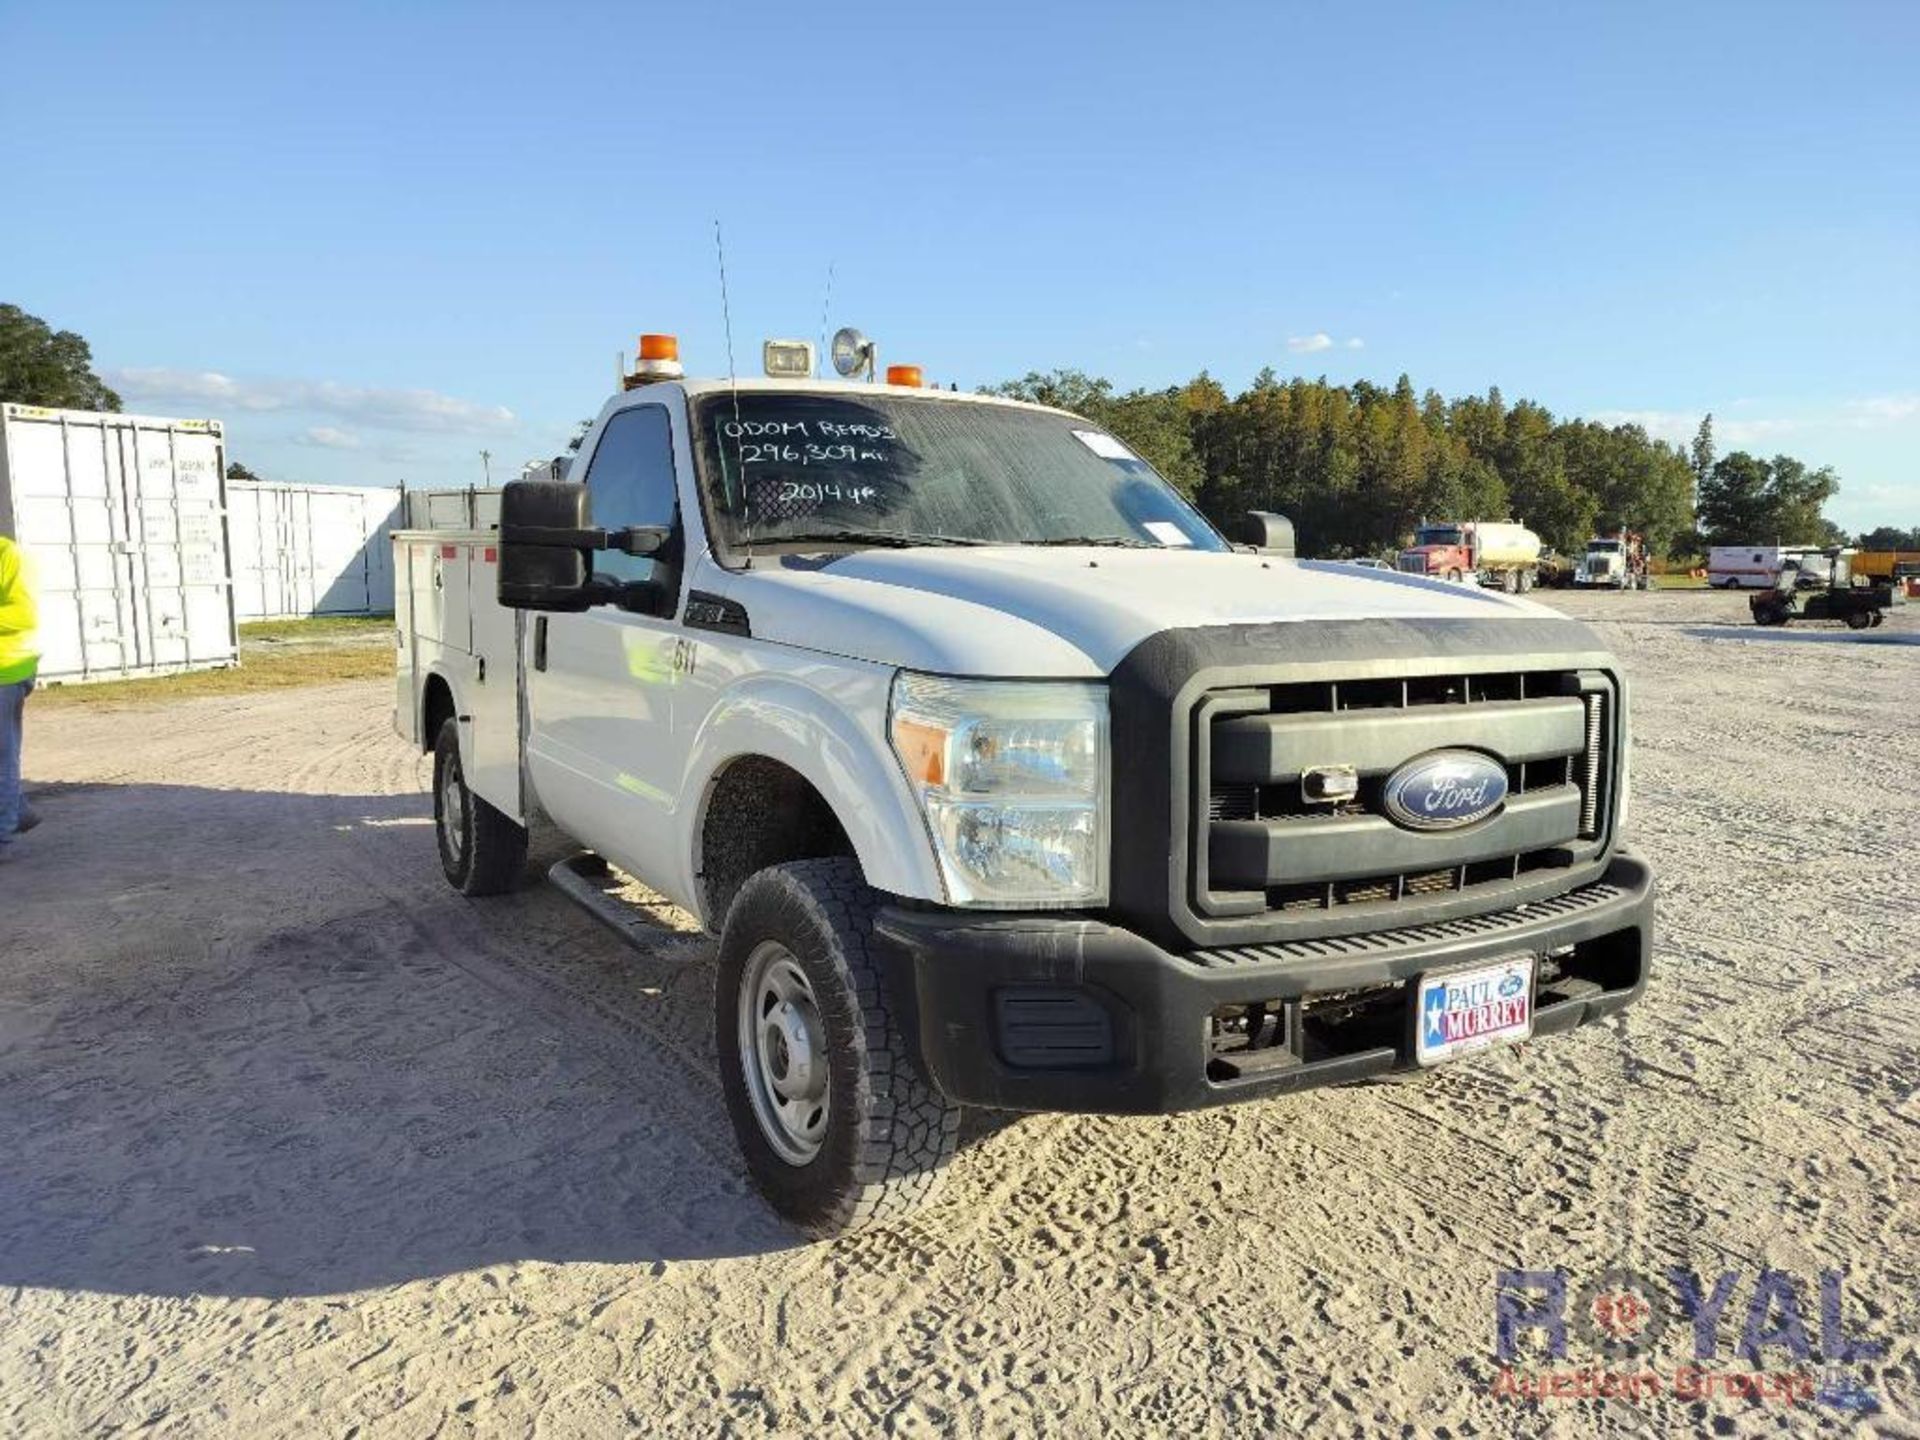 2014 Ford F350 4x4 Service Truck - Image 2 of 25